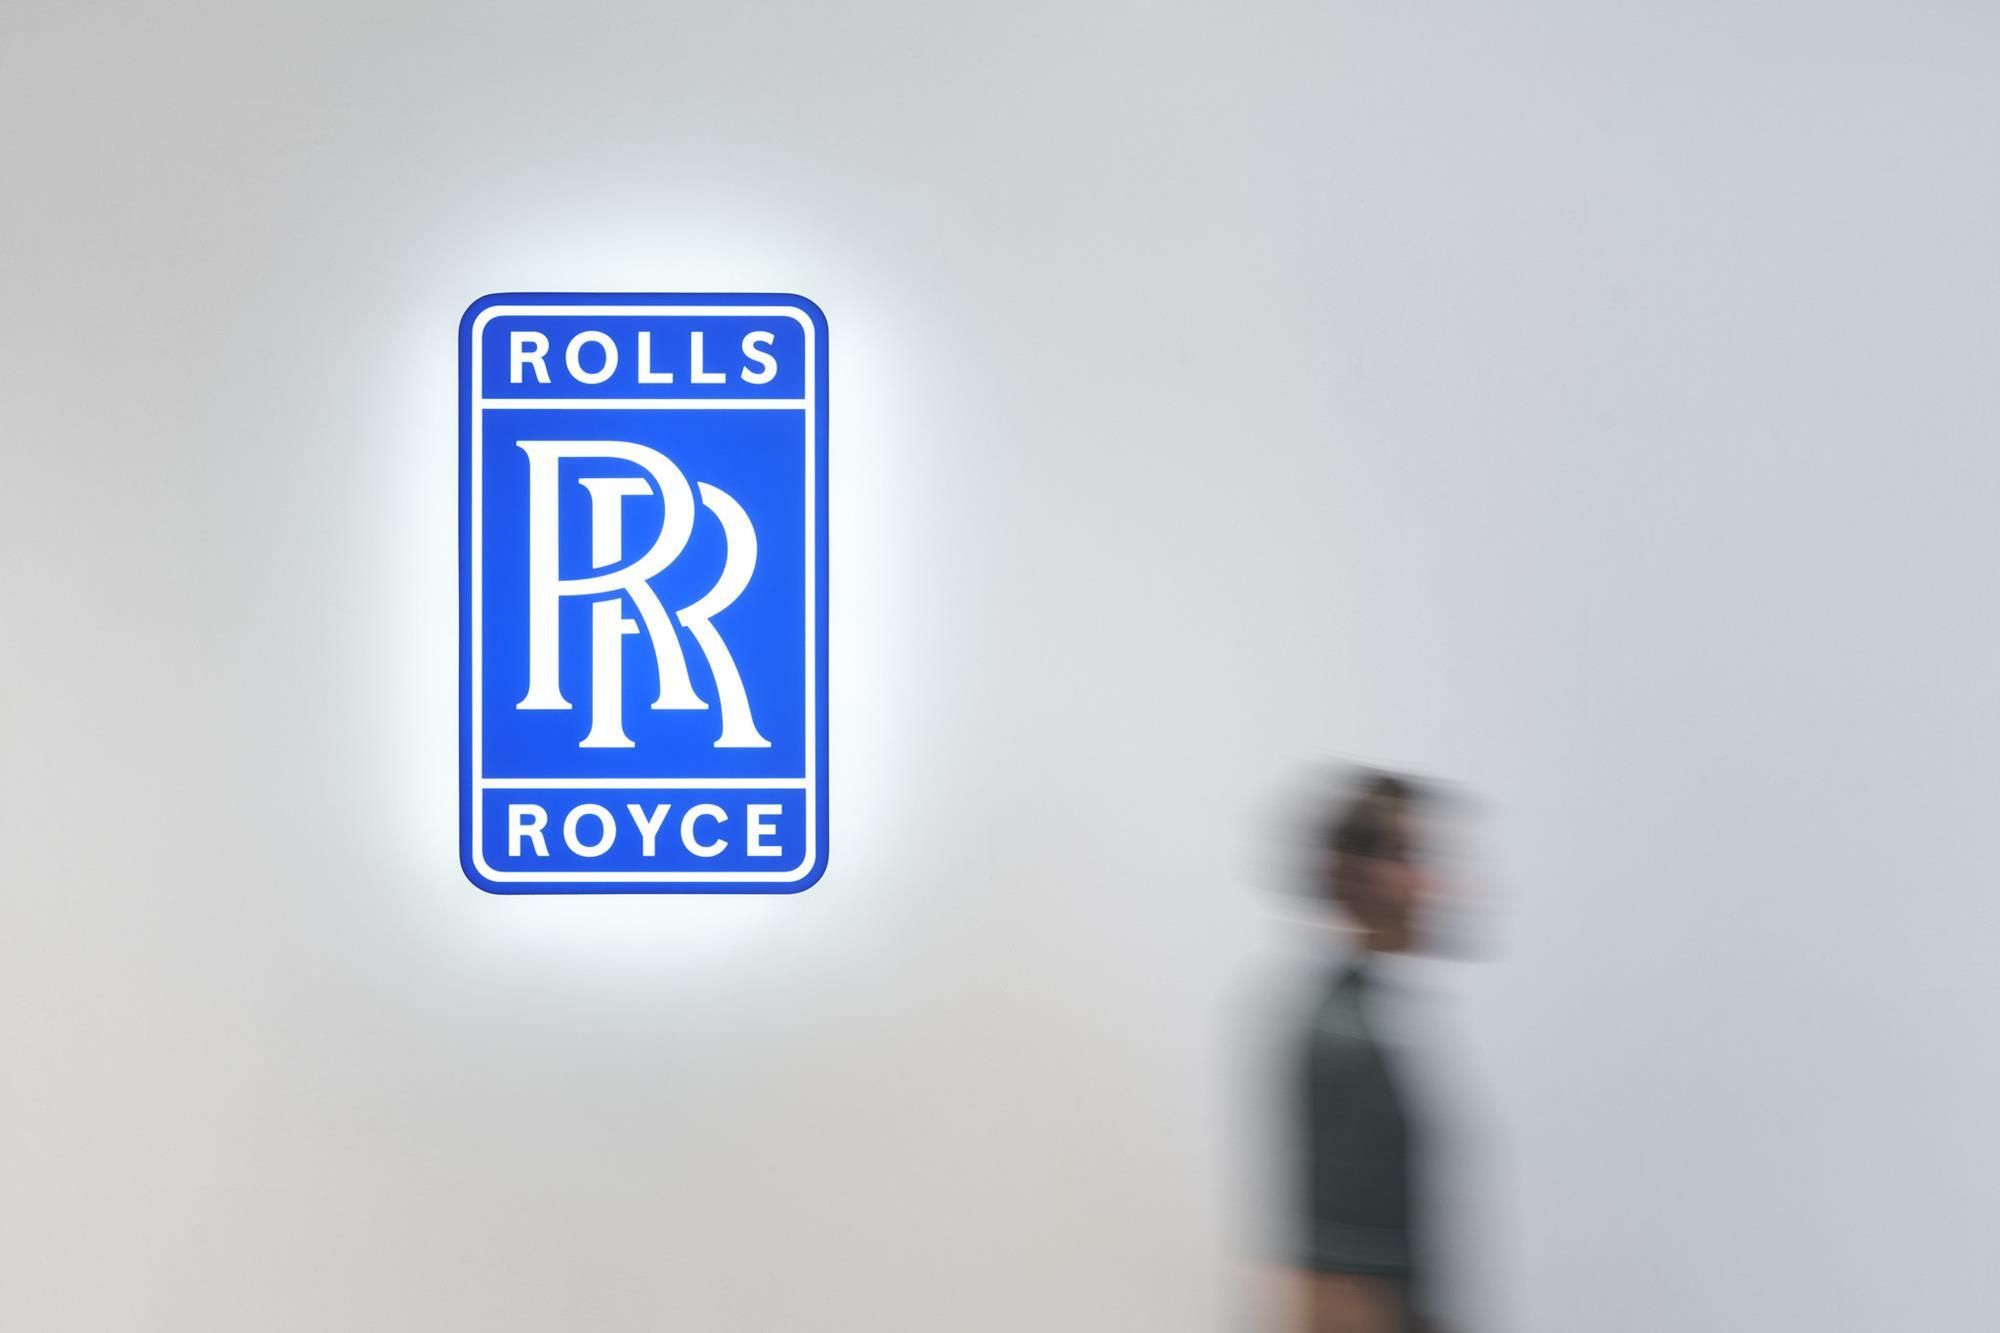 Rolls-Royce to cut up to 2,500 jobs in bid to cut costs